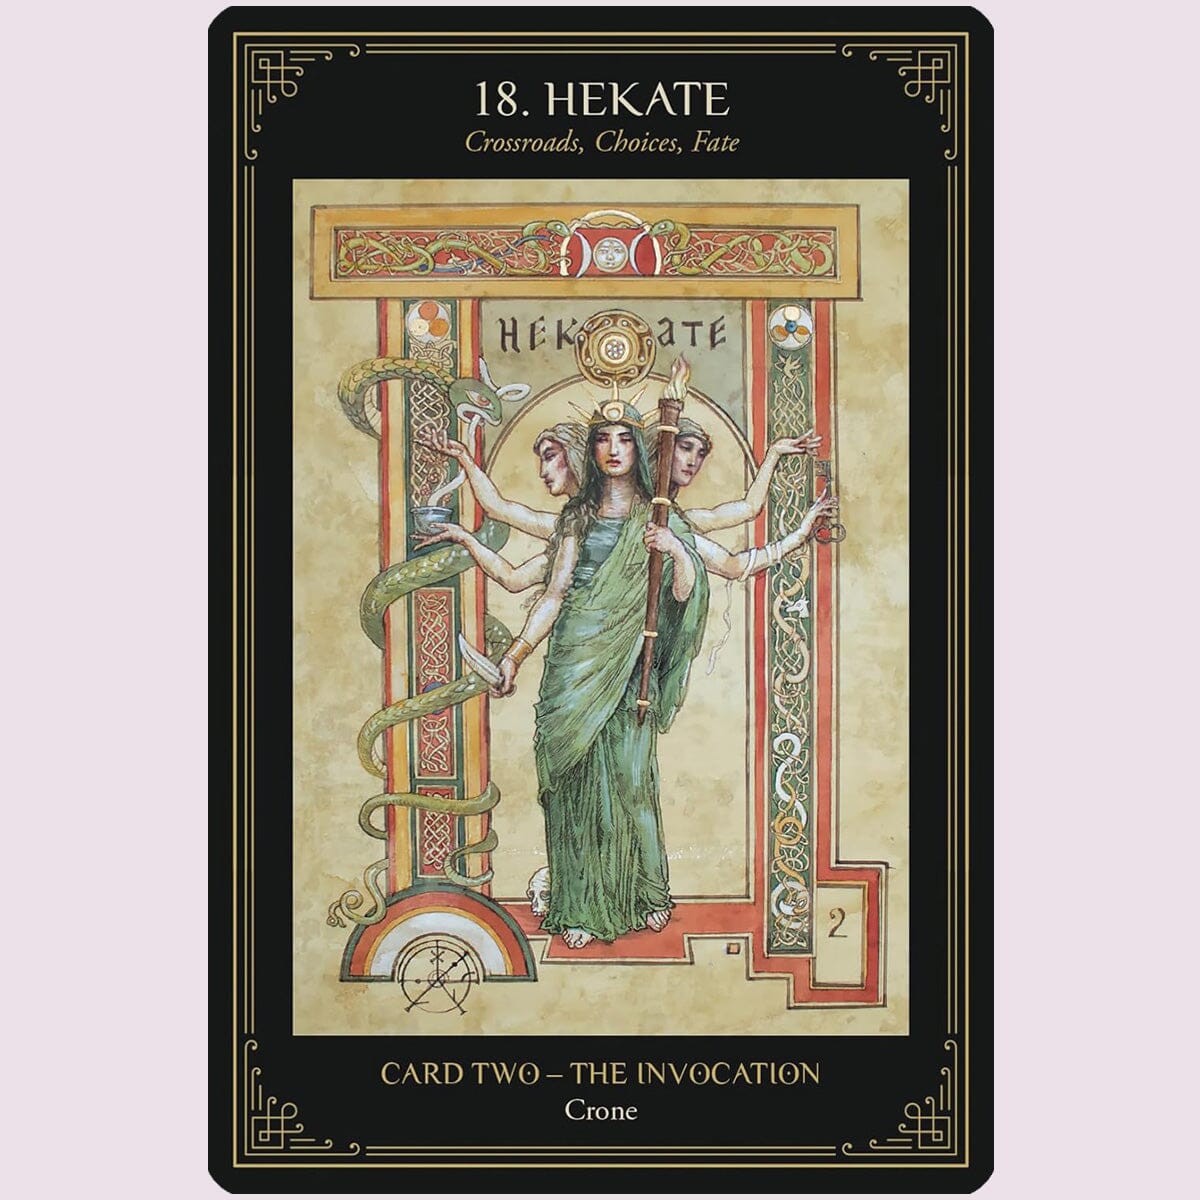 The Great Goddess Oracle Oracle Deck